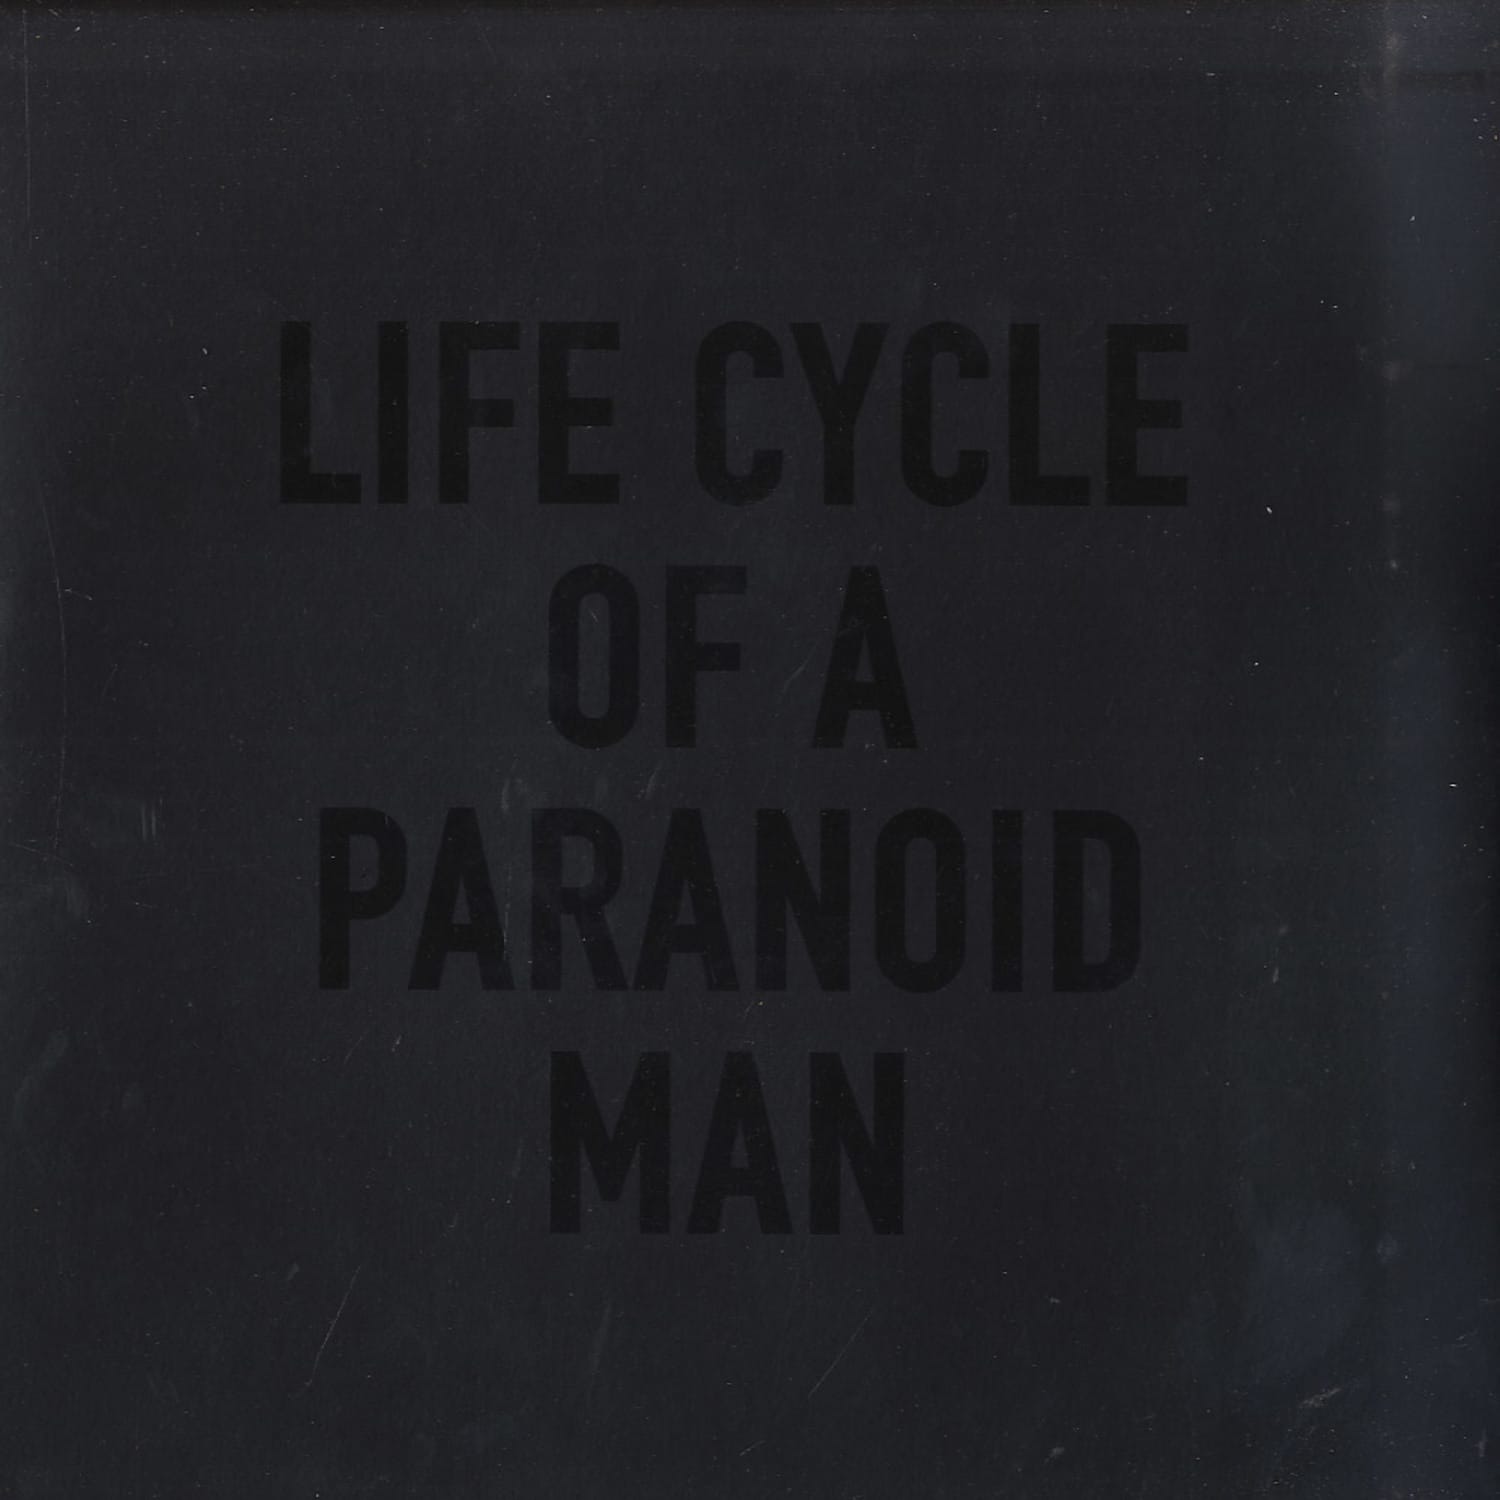 Richard Gateaux - LIFE CYCLE OF A PARANOID MAN 